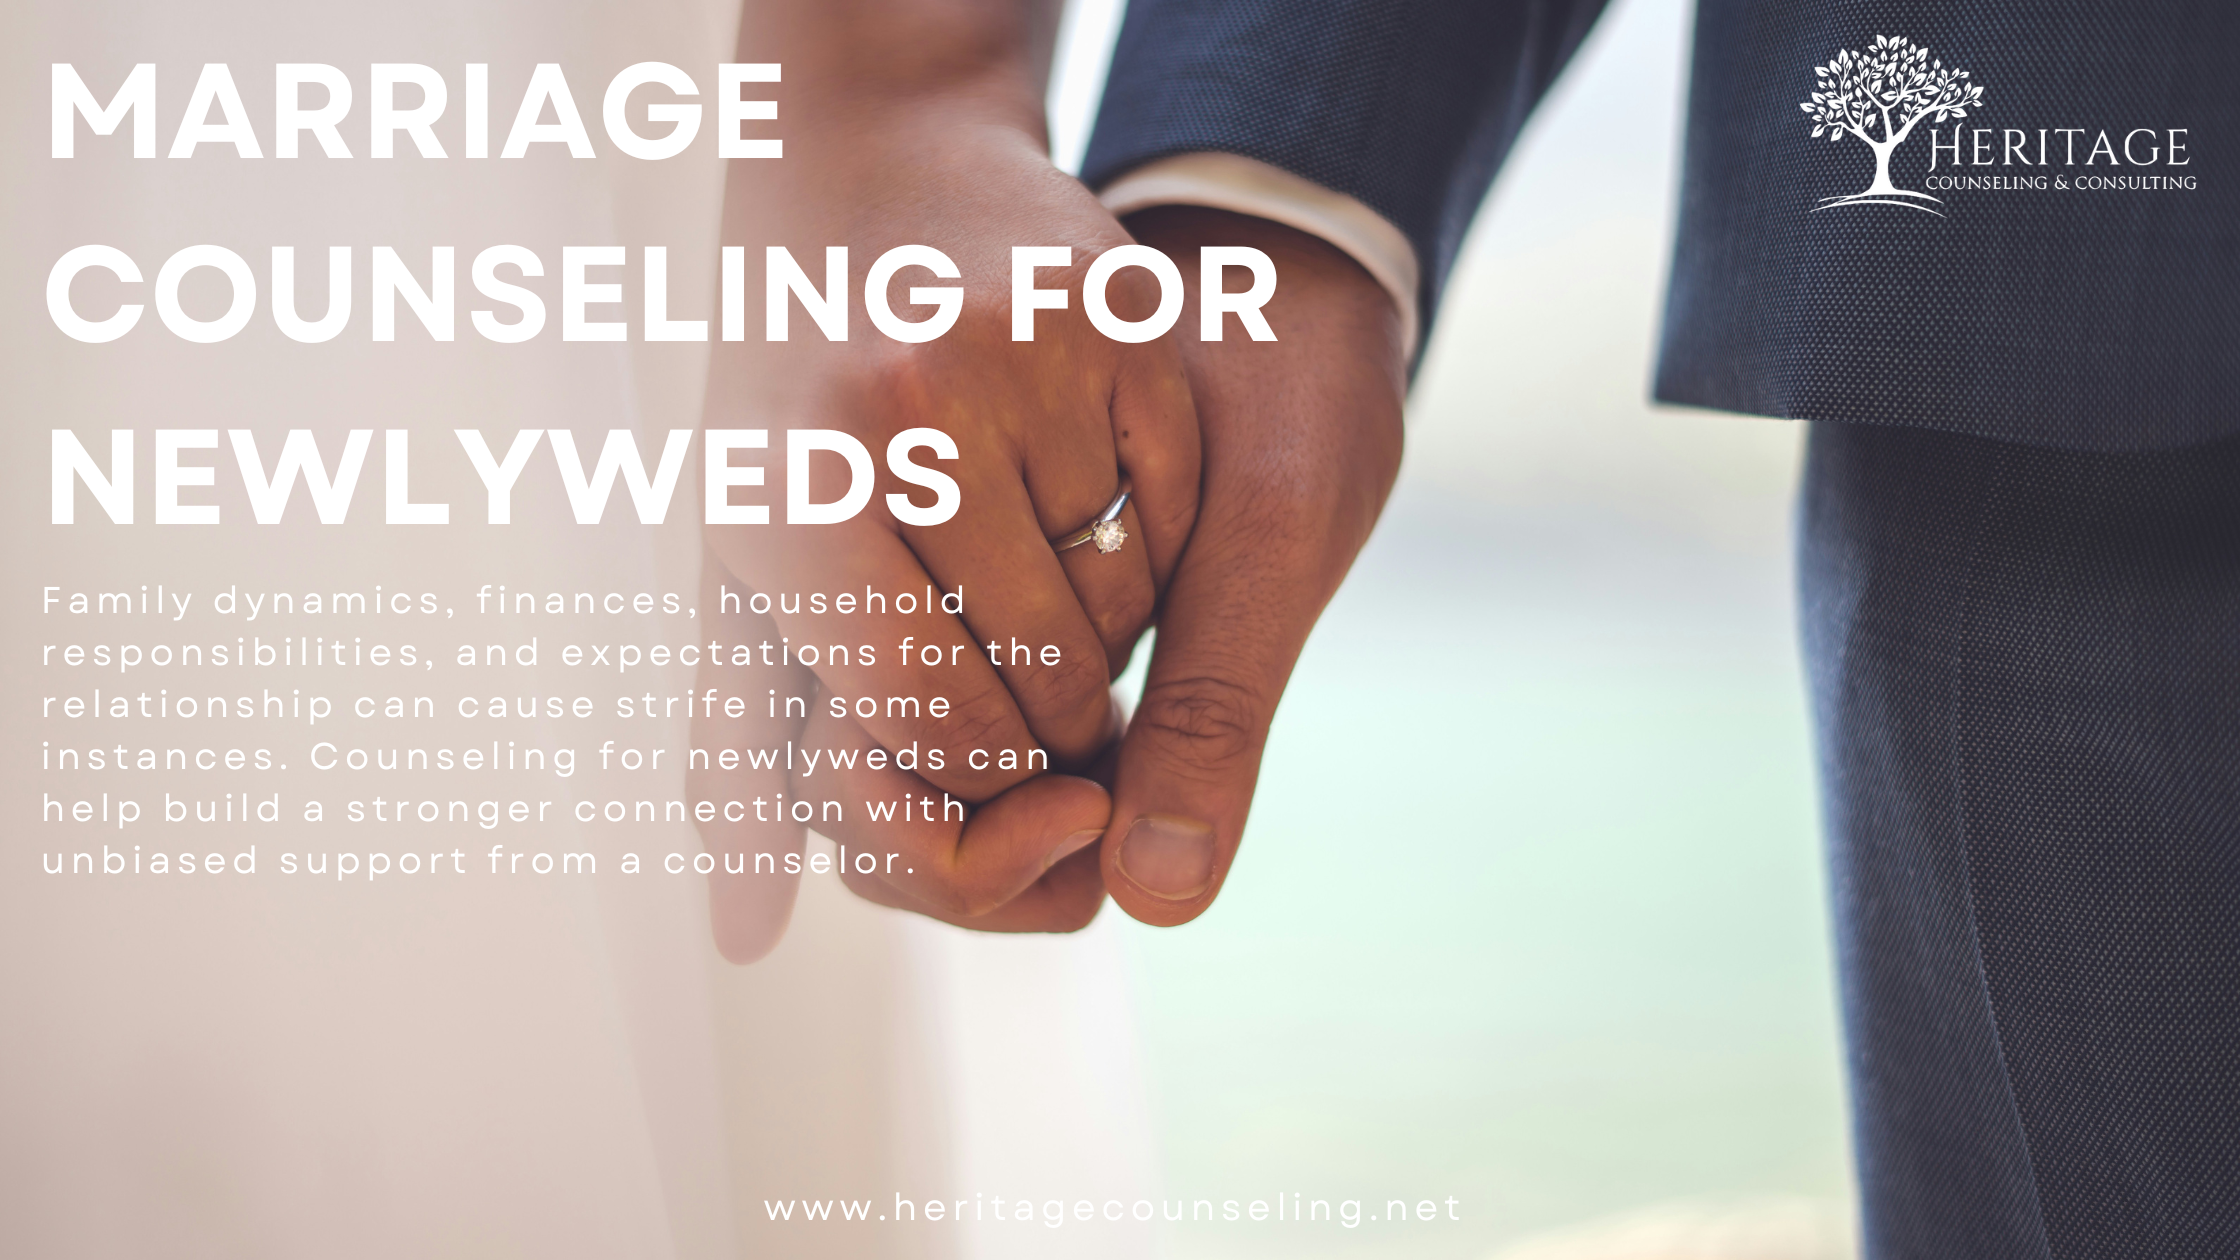 Marriage Counseling for Newlyweds